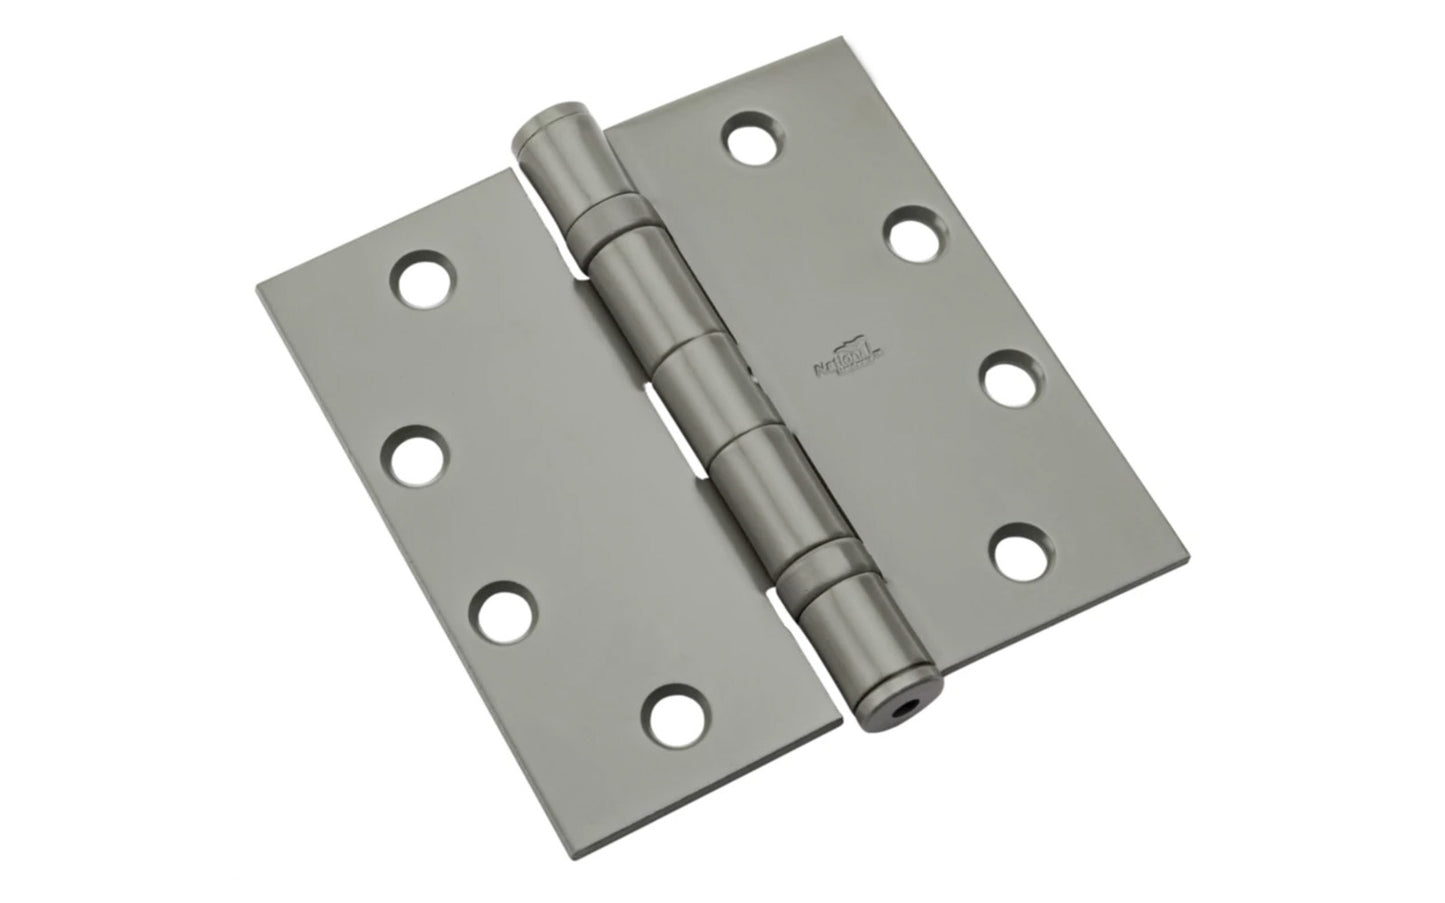 This 4-1/2" Gray Prime Coat Finish Ball-Bearing Hinge is more durable & longer-lasting than standard hinges. Equipped with two permanently lubricated ball bearings for smoother & quieter operation. Template screw hole location for use on either wood or hollow metal doors & frames. National Hardware Model No. N236-011.